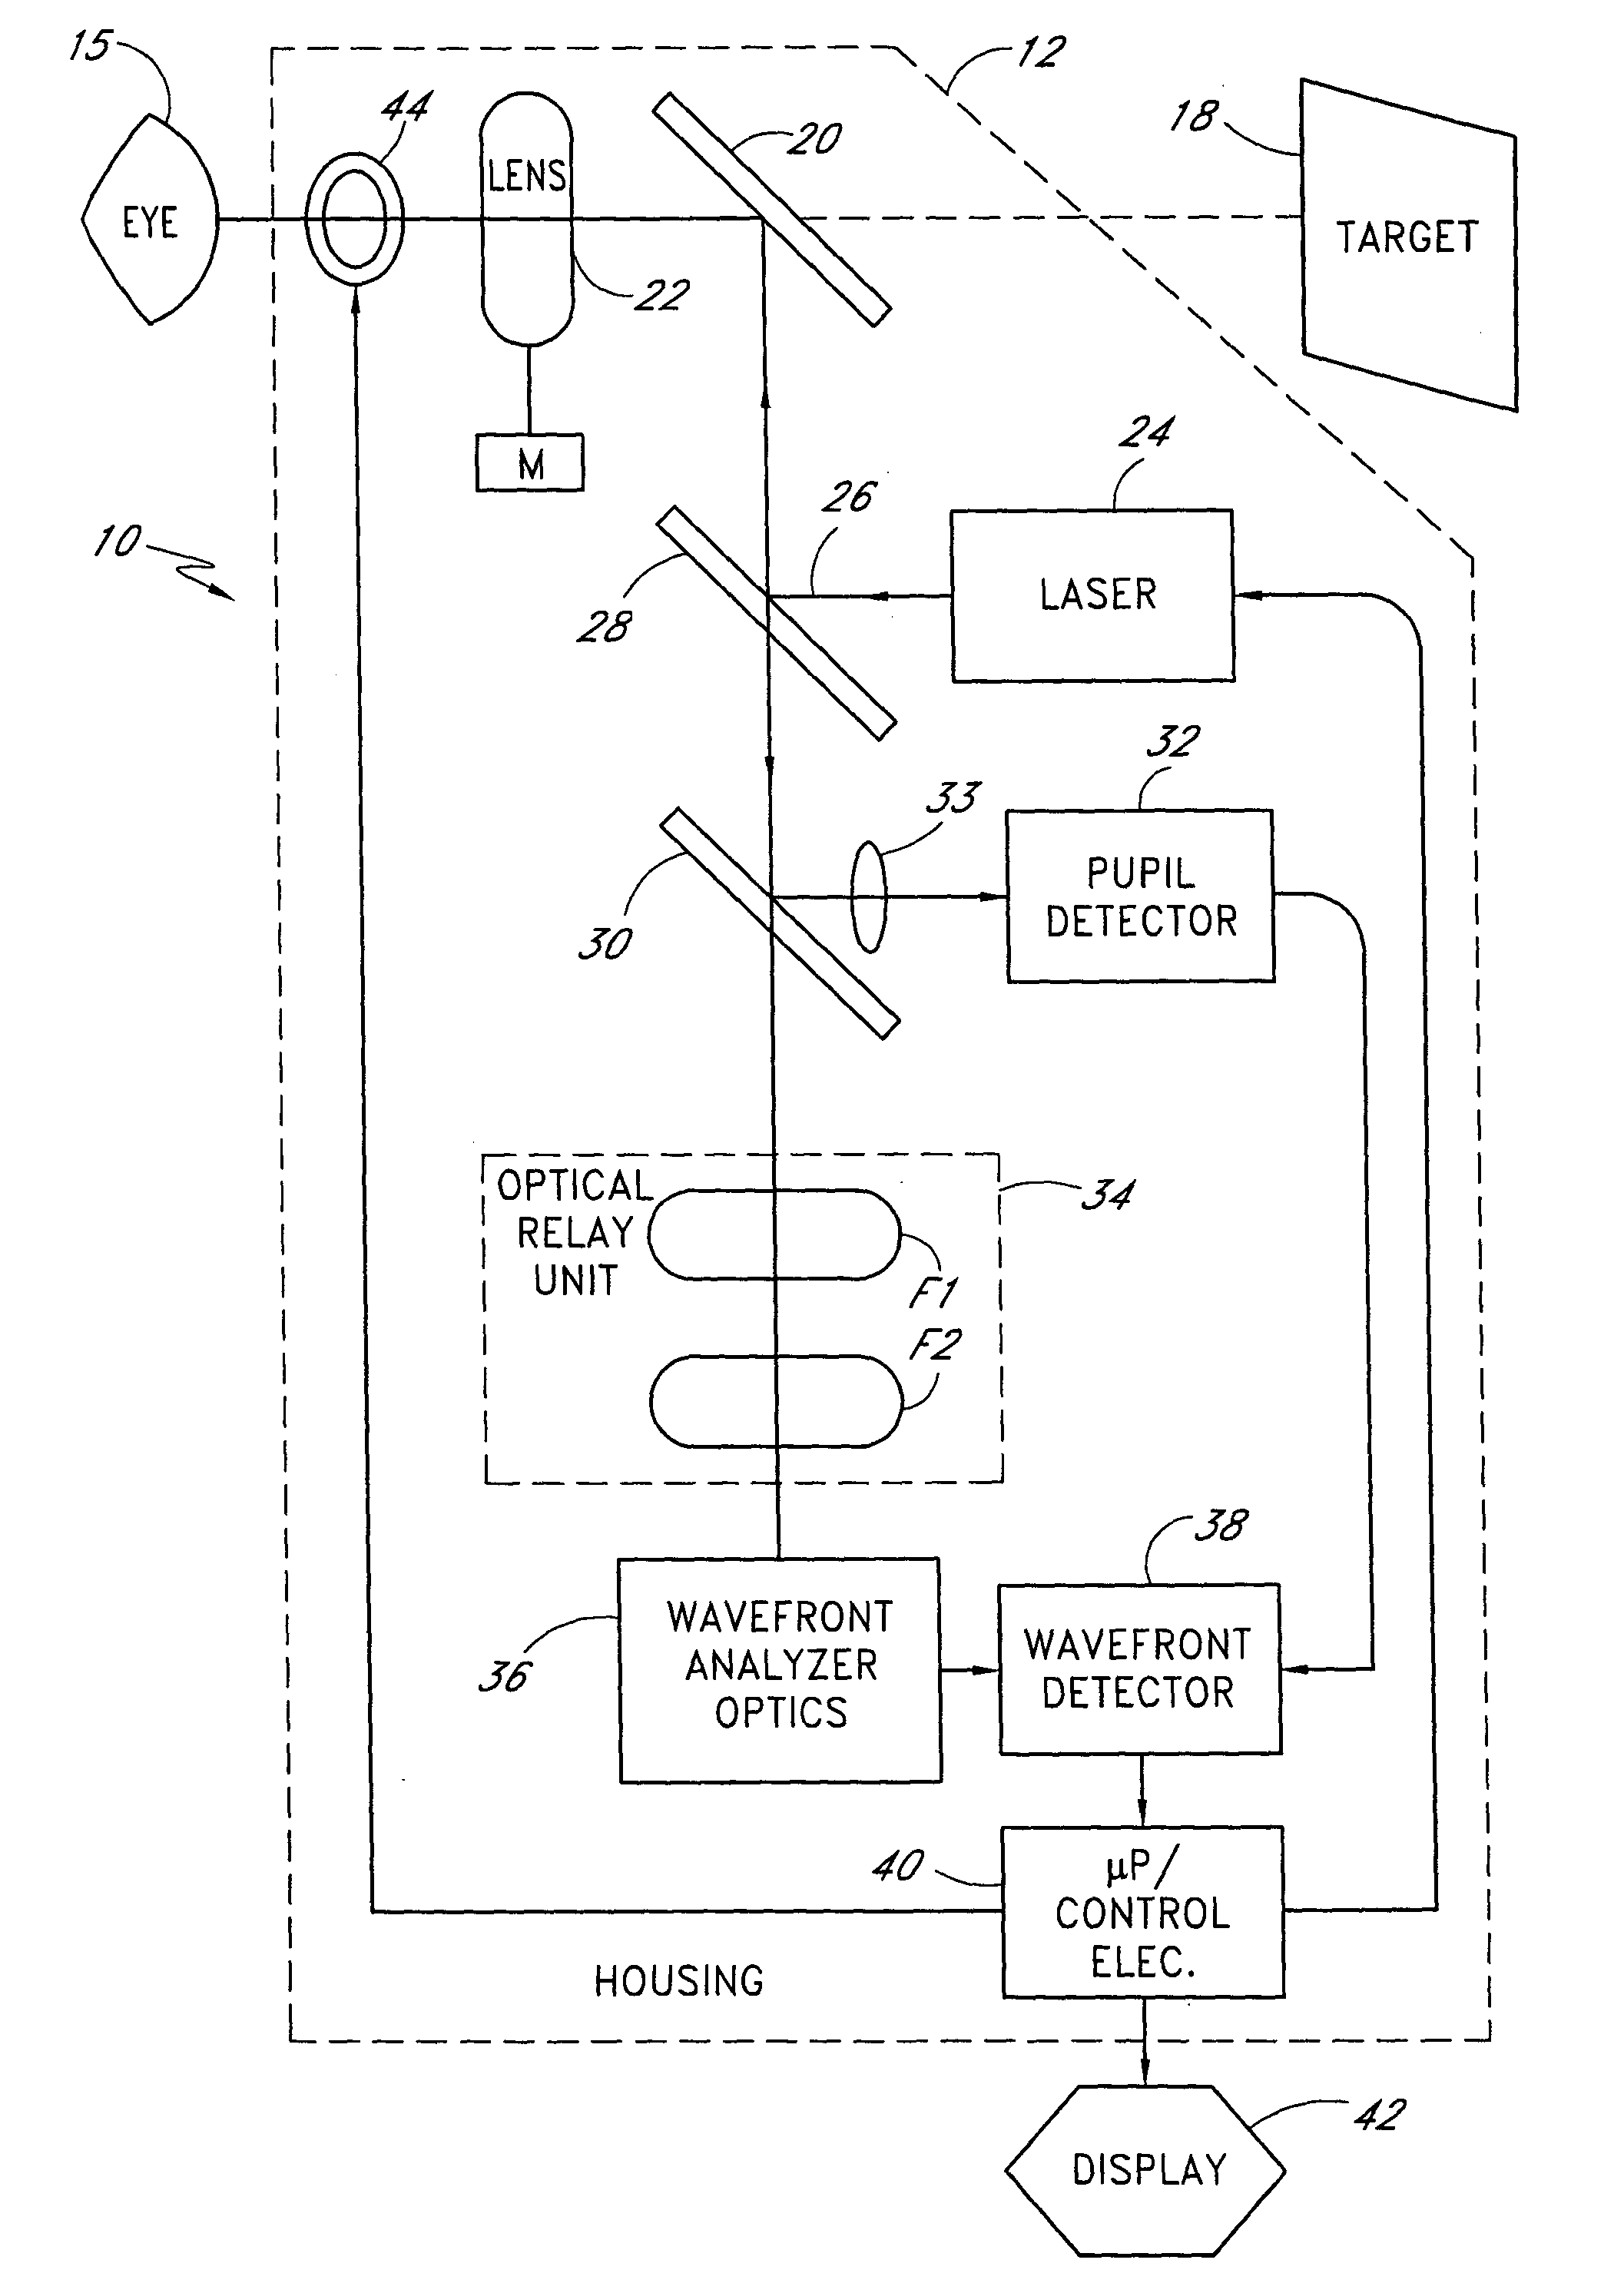 Apparatus and method for determining subjective responses using objective characterization of vision based on wavefront sensing